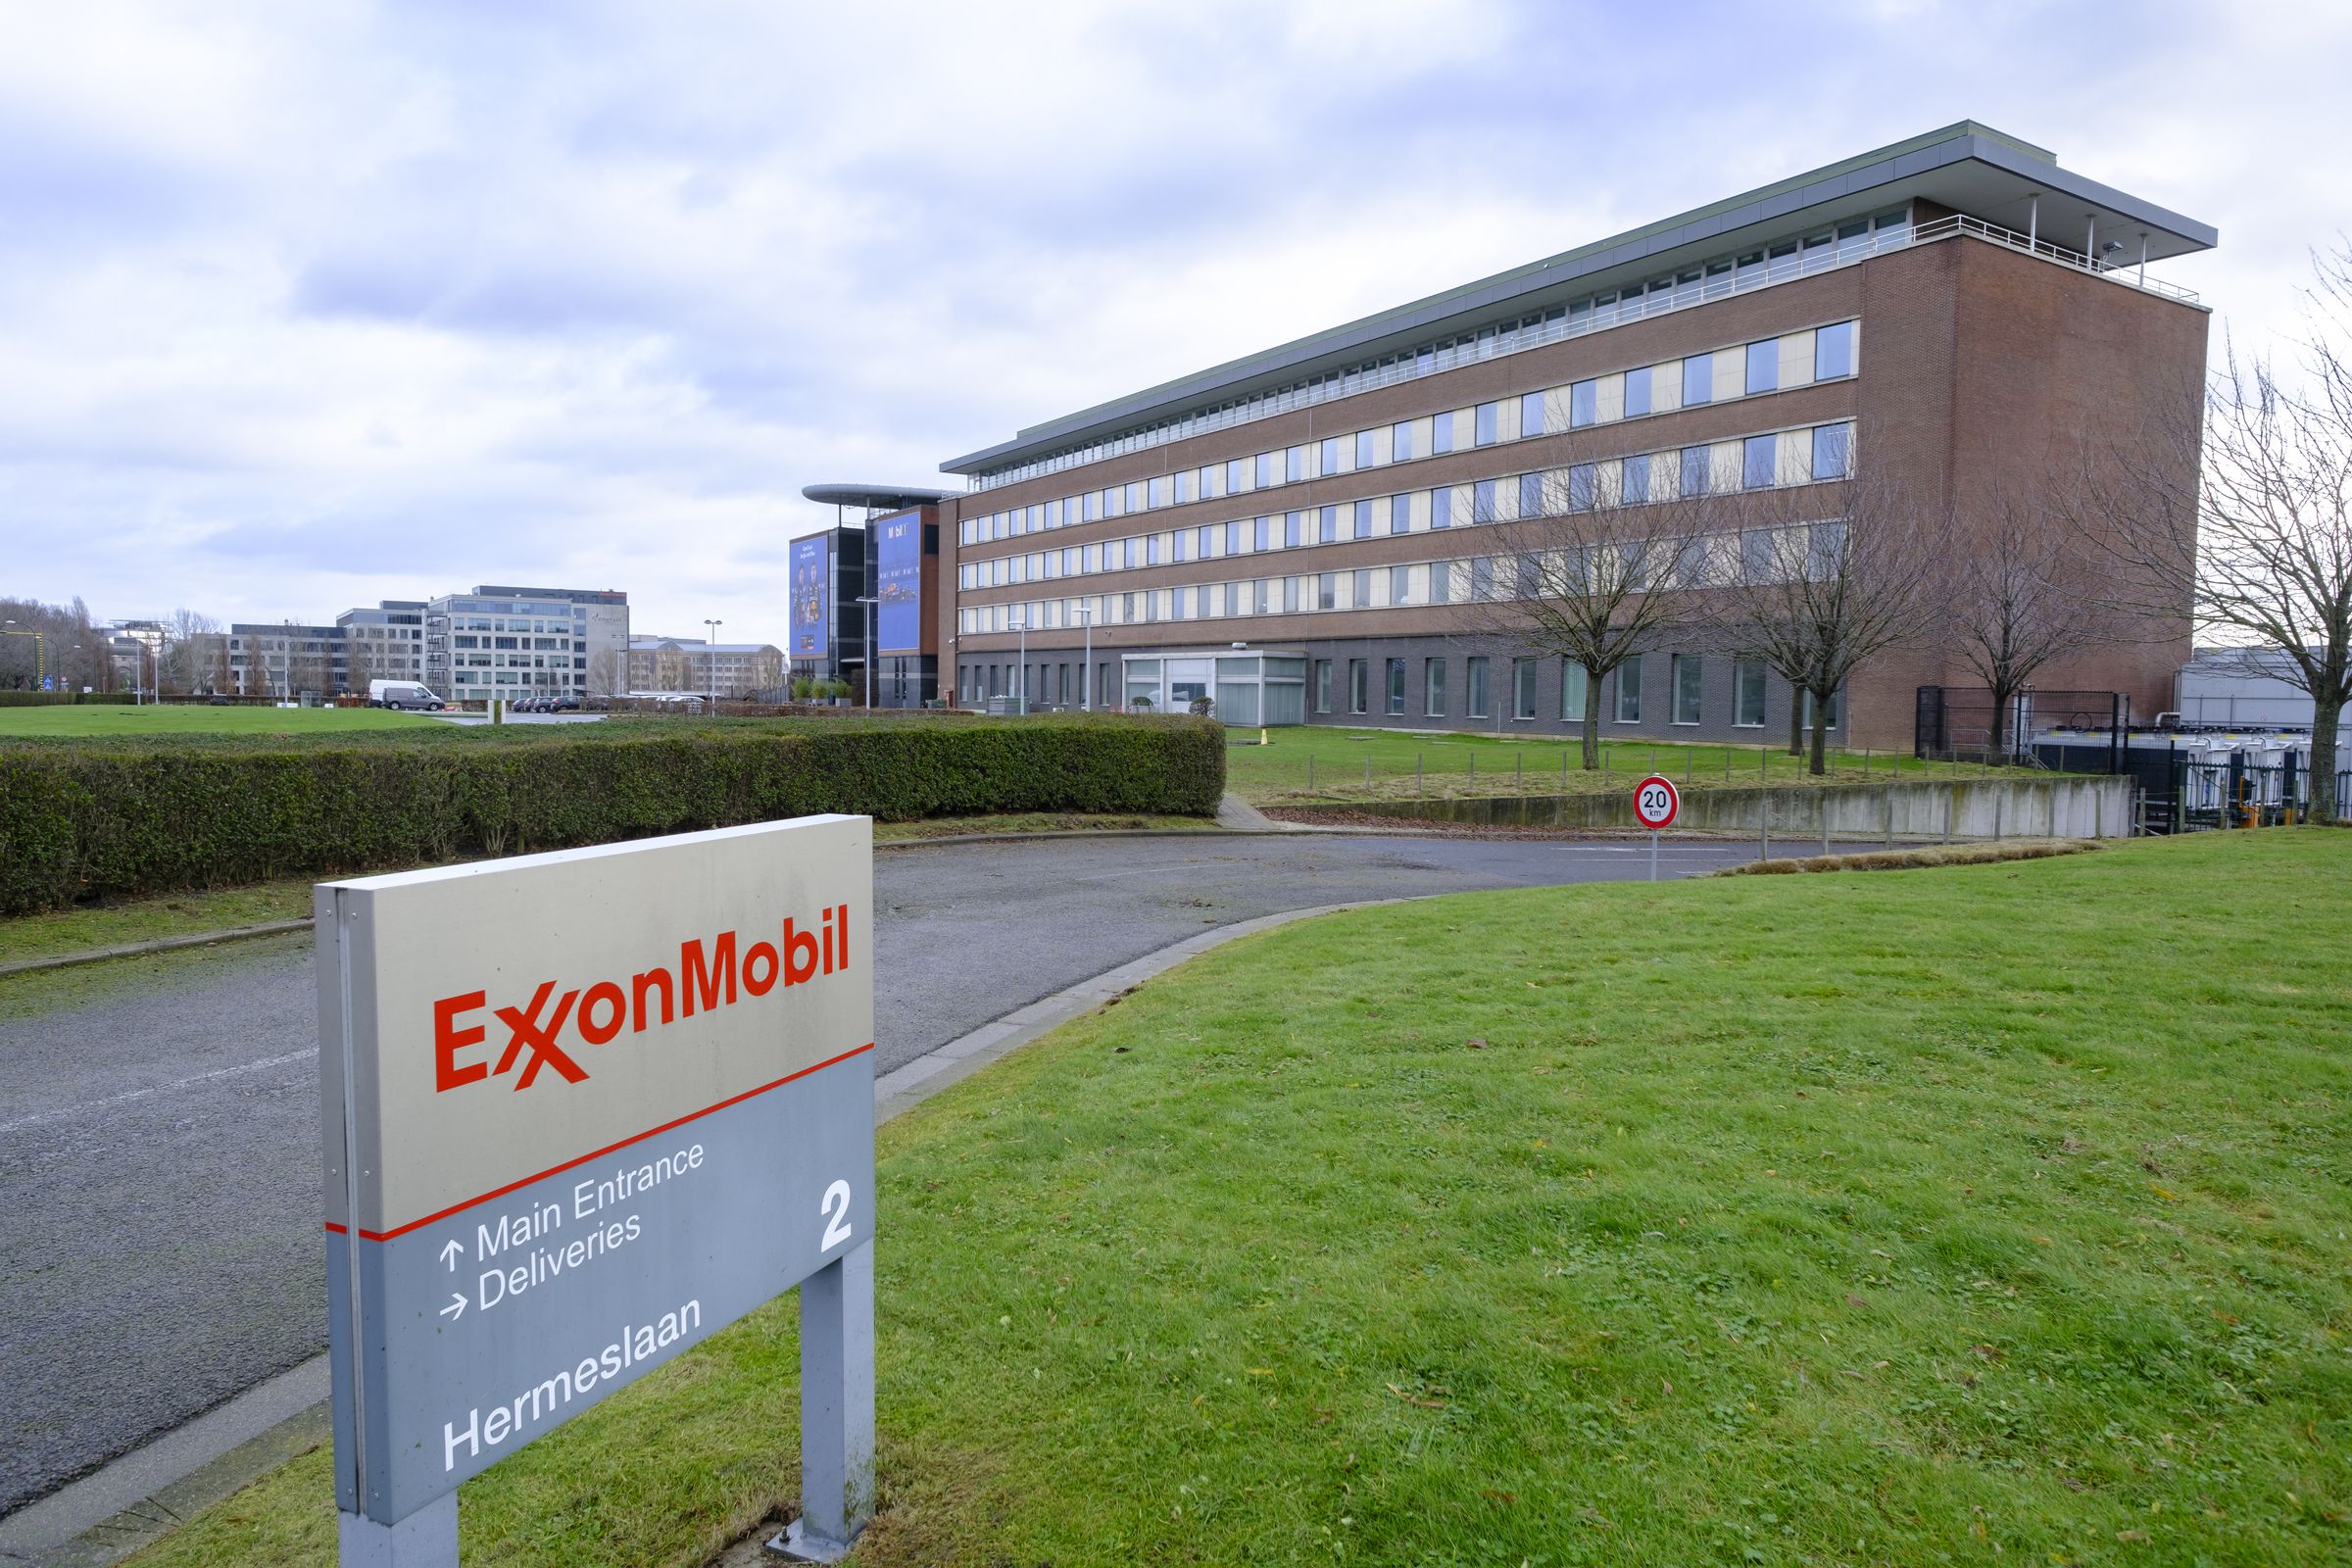 ExxonMobil accurately predicted climate change while publicly dismissing it